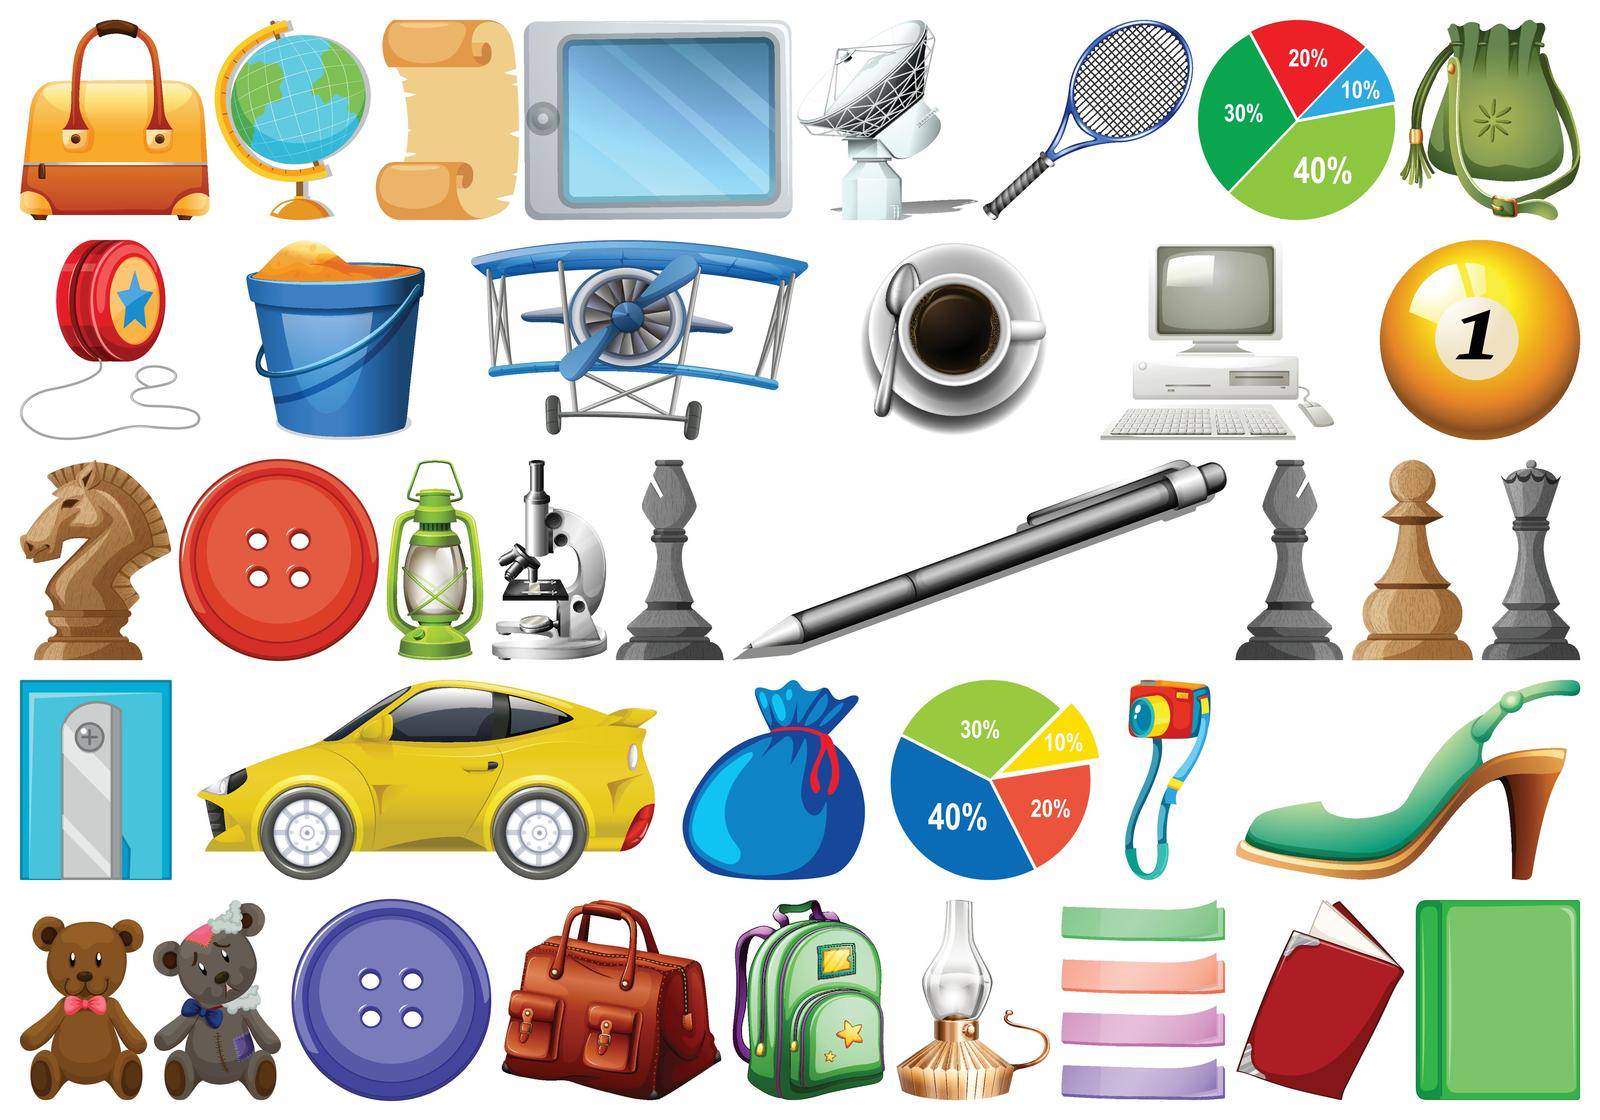 Assorted household and office equipment by iimages